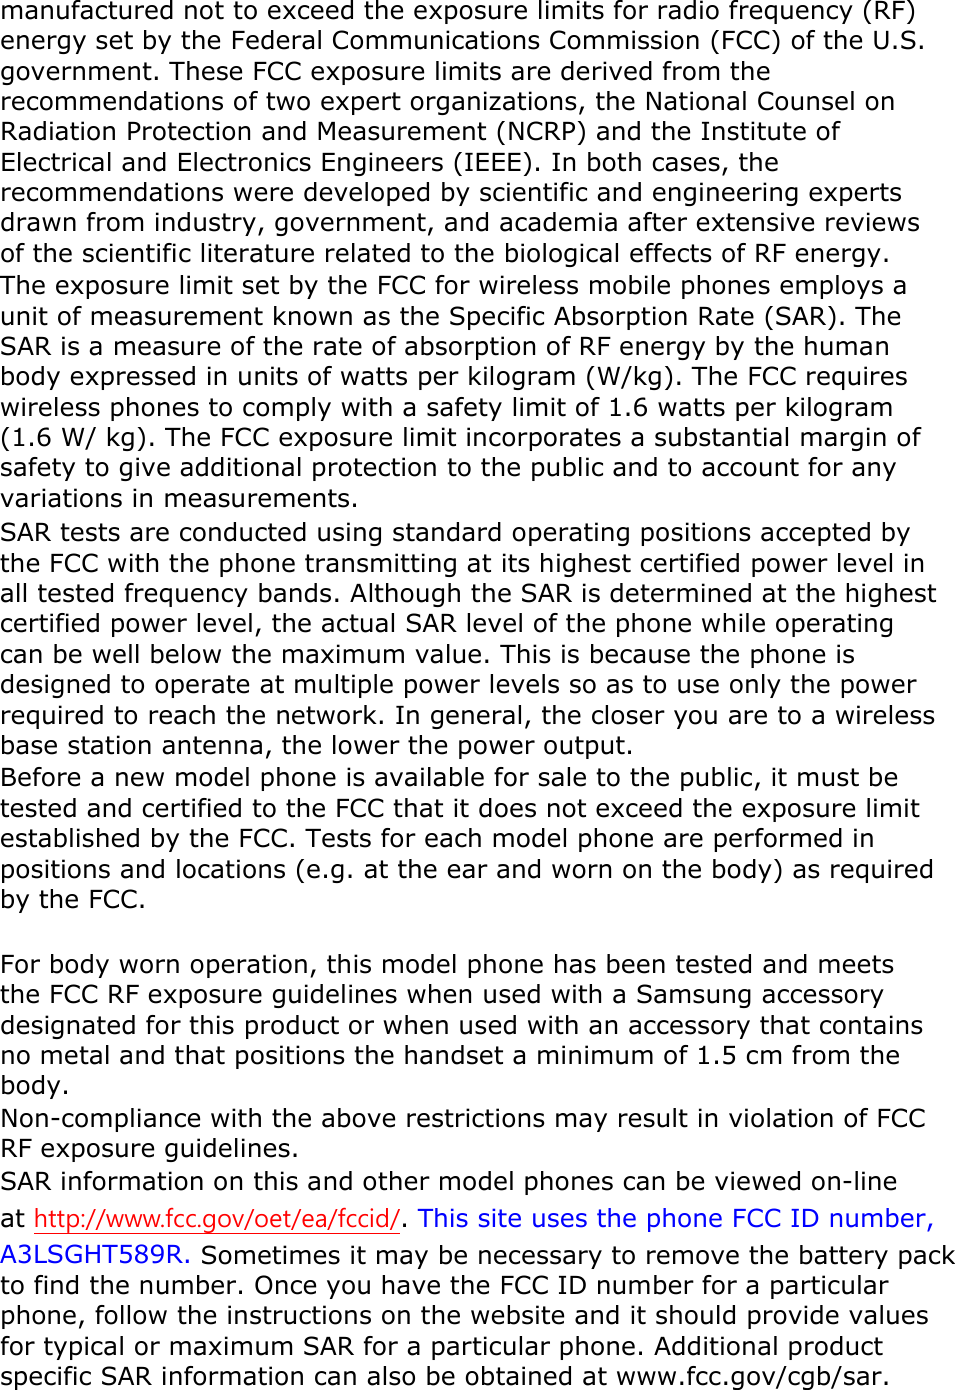 manufactured not to exceed the exposure limits for radio frequency (RF) energy set by the Federal Communications Commission (FCC) of the U.S. government. These FCC exposure limits are derived from the recommendations of two expert organizations, the National Counsel on Radiation Protection and Measurement (NCRP) and the Institute of Electrical and Electronics Engineers (IEEE). In both cases, the recommendations were developed by scientific and engineering experts drawn from industry, government, and academia after extensive reviews of the scientific literature related to the biological effects of RF energy. The exposure limit set by the FCC for wireless mobile phones employs a unit of measurement known as the Specific Absorption Rate (SAR). The SAR is a measure of the rate of absorption of RF energy by the human body expressed in units of watts per kilogram (W/kg). The FCC requires wireless phones to comply with a safety limit of 1.6 watts per kilogram (1.6 W/ kg). The FCC exposure limit incorporates a substantial margin of safety to give additional protection to the public and to account for any variations in measurements. SAR tests are conducted using standard operating positions accepted by the FCC with the phone transmitting at its highest certified power level in all tested frequency bands. Although the SAR is determined at the highest certified power level, the actual SAR level of the phone while operating can be well below the maximum value. This is because the phone is designed to operate at multiple power levels so as to use only the power required to reach the network. In general, the closer you are to a wireless base station antenna, the lower the power output. Before a new model phone is available for sale to the public, it must be tested and certified to the FCC that it does not exceed the exposure limit established by the FCC. Tests for each model phone are performed in positions and locations (e.g. at the ear and worn on the body) as required by the FCC.      For body worn operation, this model phone has been tested and meets the FCC RF exposure guidelines when used with a Samsung accessory designated for this product or when used with an accessory that contains no metal and that positions the handset a minimum of 1.5 cm from the body.   Non-compliance with the above restrictions may result in violation of FCC RF exposure guidelines. SAR information on this and other model phones can be viewed on-line at http://www.fcc.gov/oet/ea/fccid/. This site uses the phone FCC ID number, A3LSGHT589R. Sometimes it may be necessary to remove the battery pack to find the number. Once you have the FCC ID number for a particular phone, follow the instructions on the website and it should provide values for typical or maximum SAR for a particular phone. Additional product specific SAR information can also be obtained at www.fcc.gov/cgb/sar. 